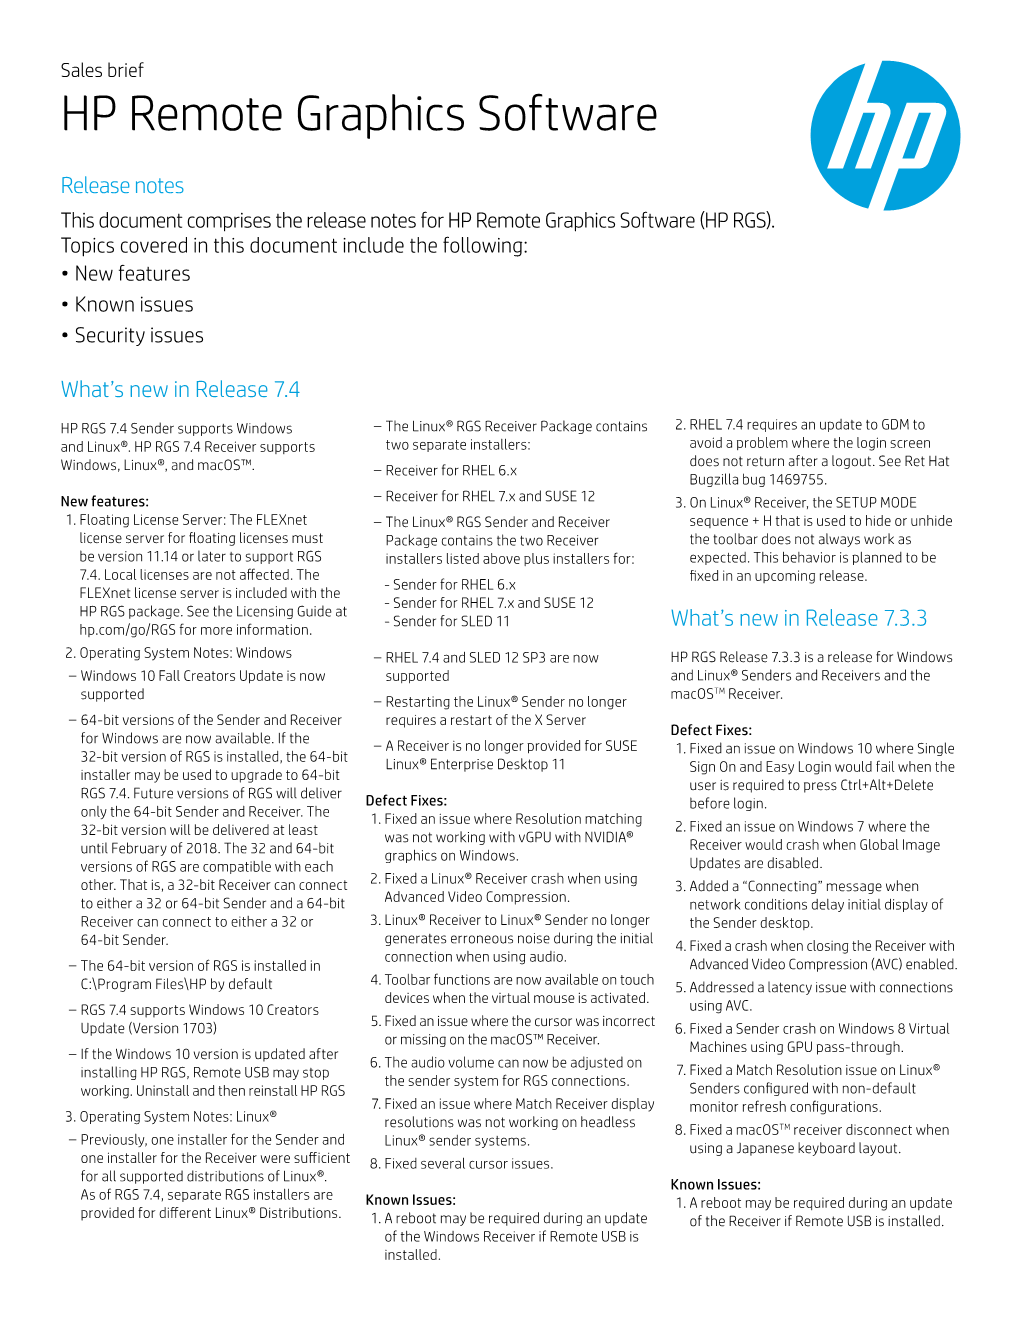 HP Remote Graphics Software